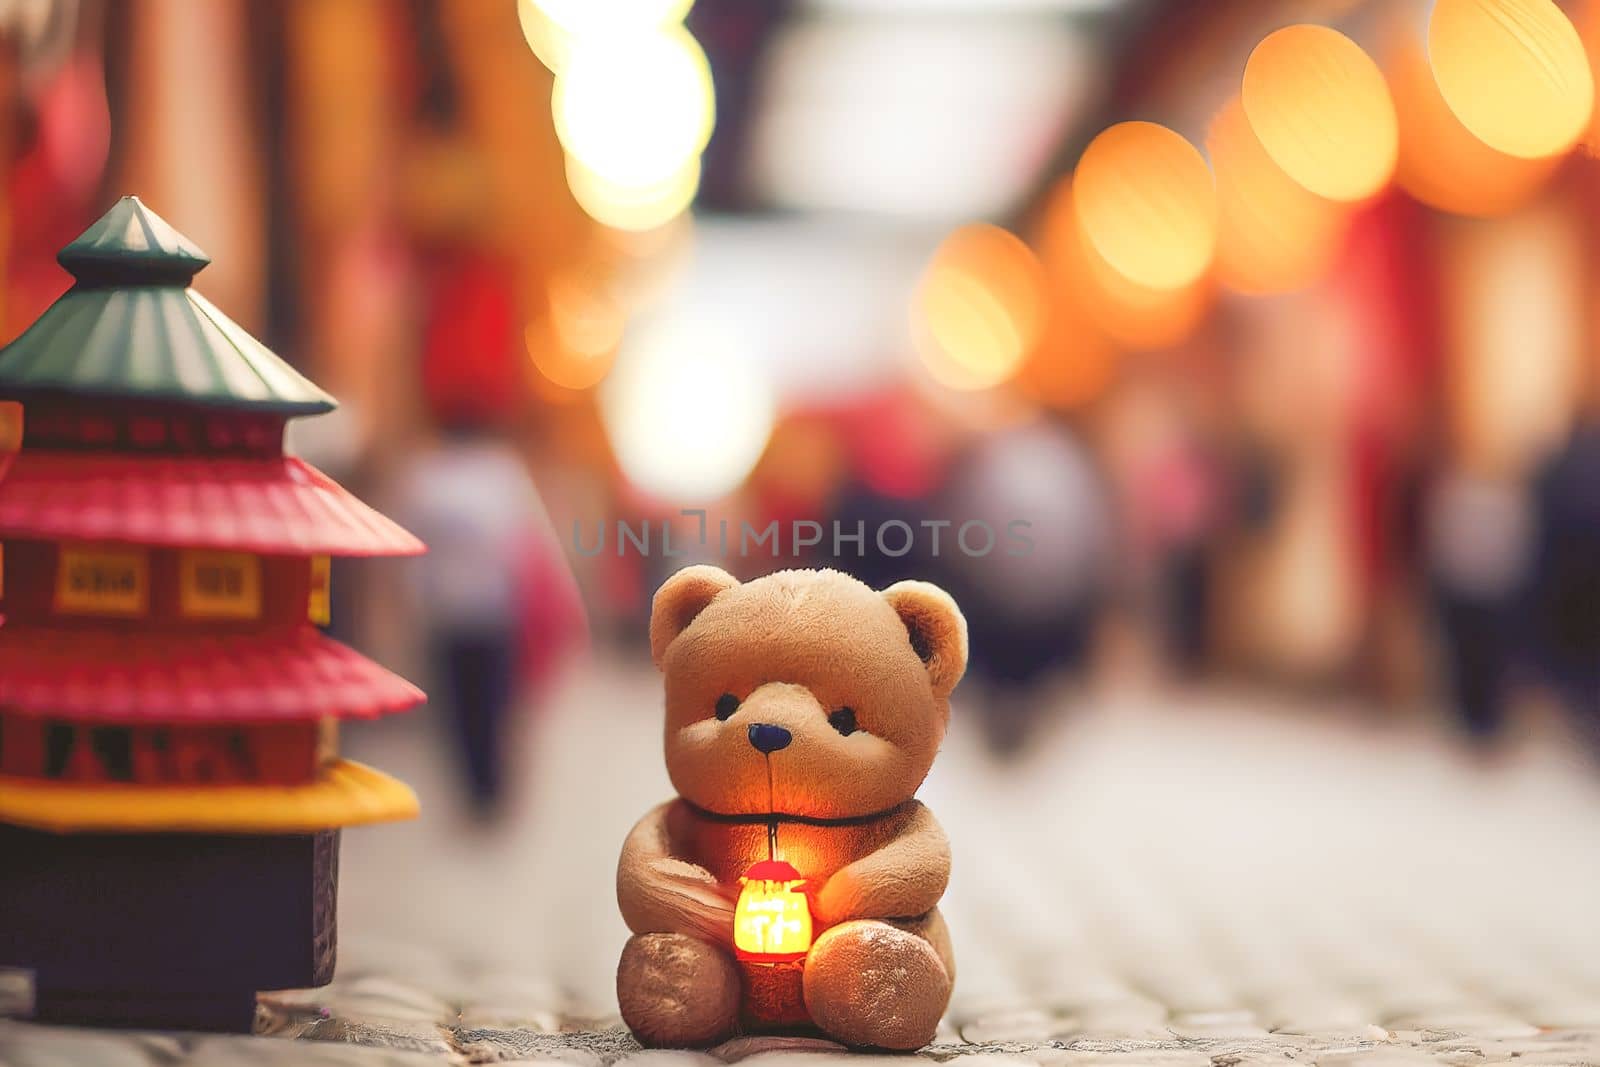 A small brown teddy bear dressed in traditional Chinese New Year clothing, standing against a bokeh background of red and gold decorations. Perfect for illustrating the concept of Chinese New Year.